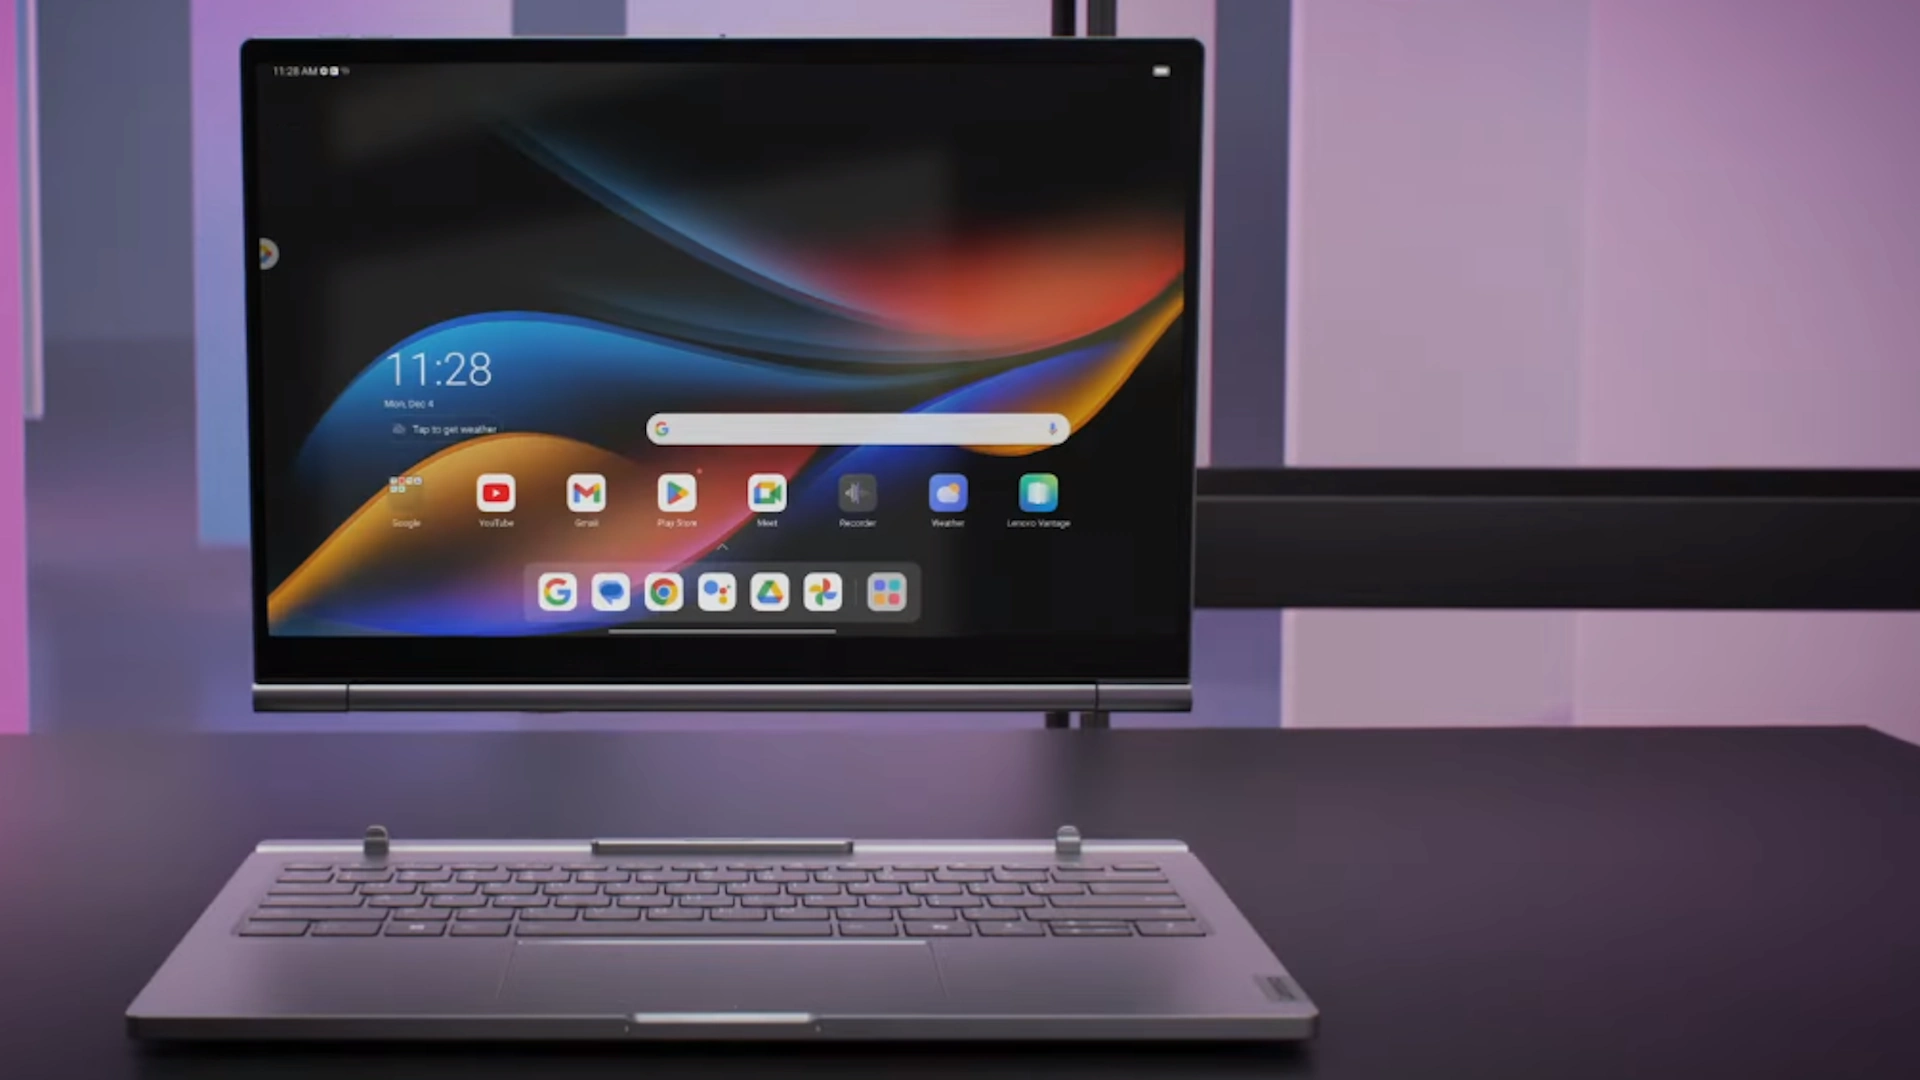 The new Lenovo laptop is a hybrid that works as two devices in one on both Windows and Android tablet OS